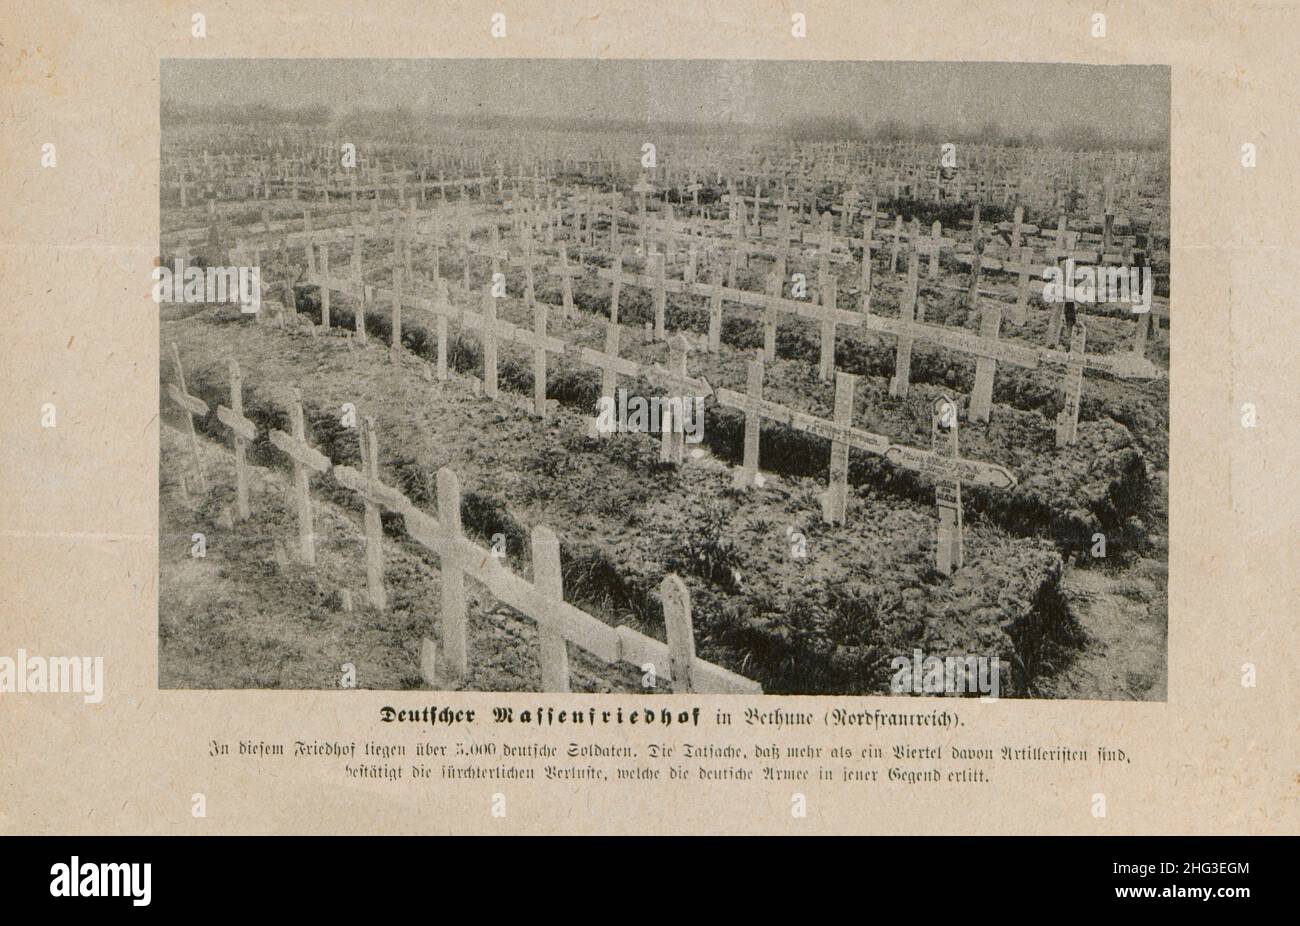 Vintage illustration of World War I. German mass grave in Bethune (Northern France): There are over 5,000 German soldiers in this cemetery. 1914-1918 Stock Photo